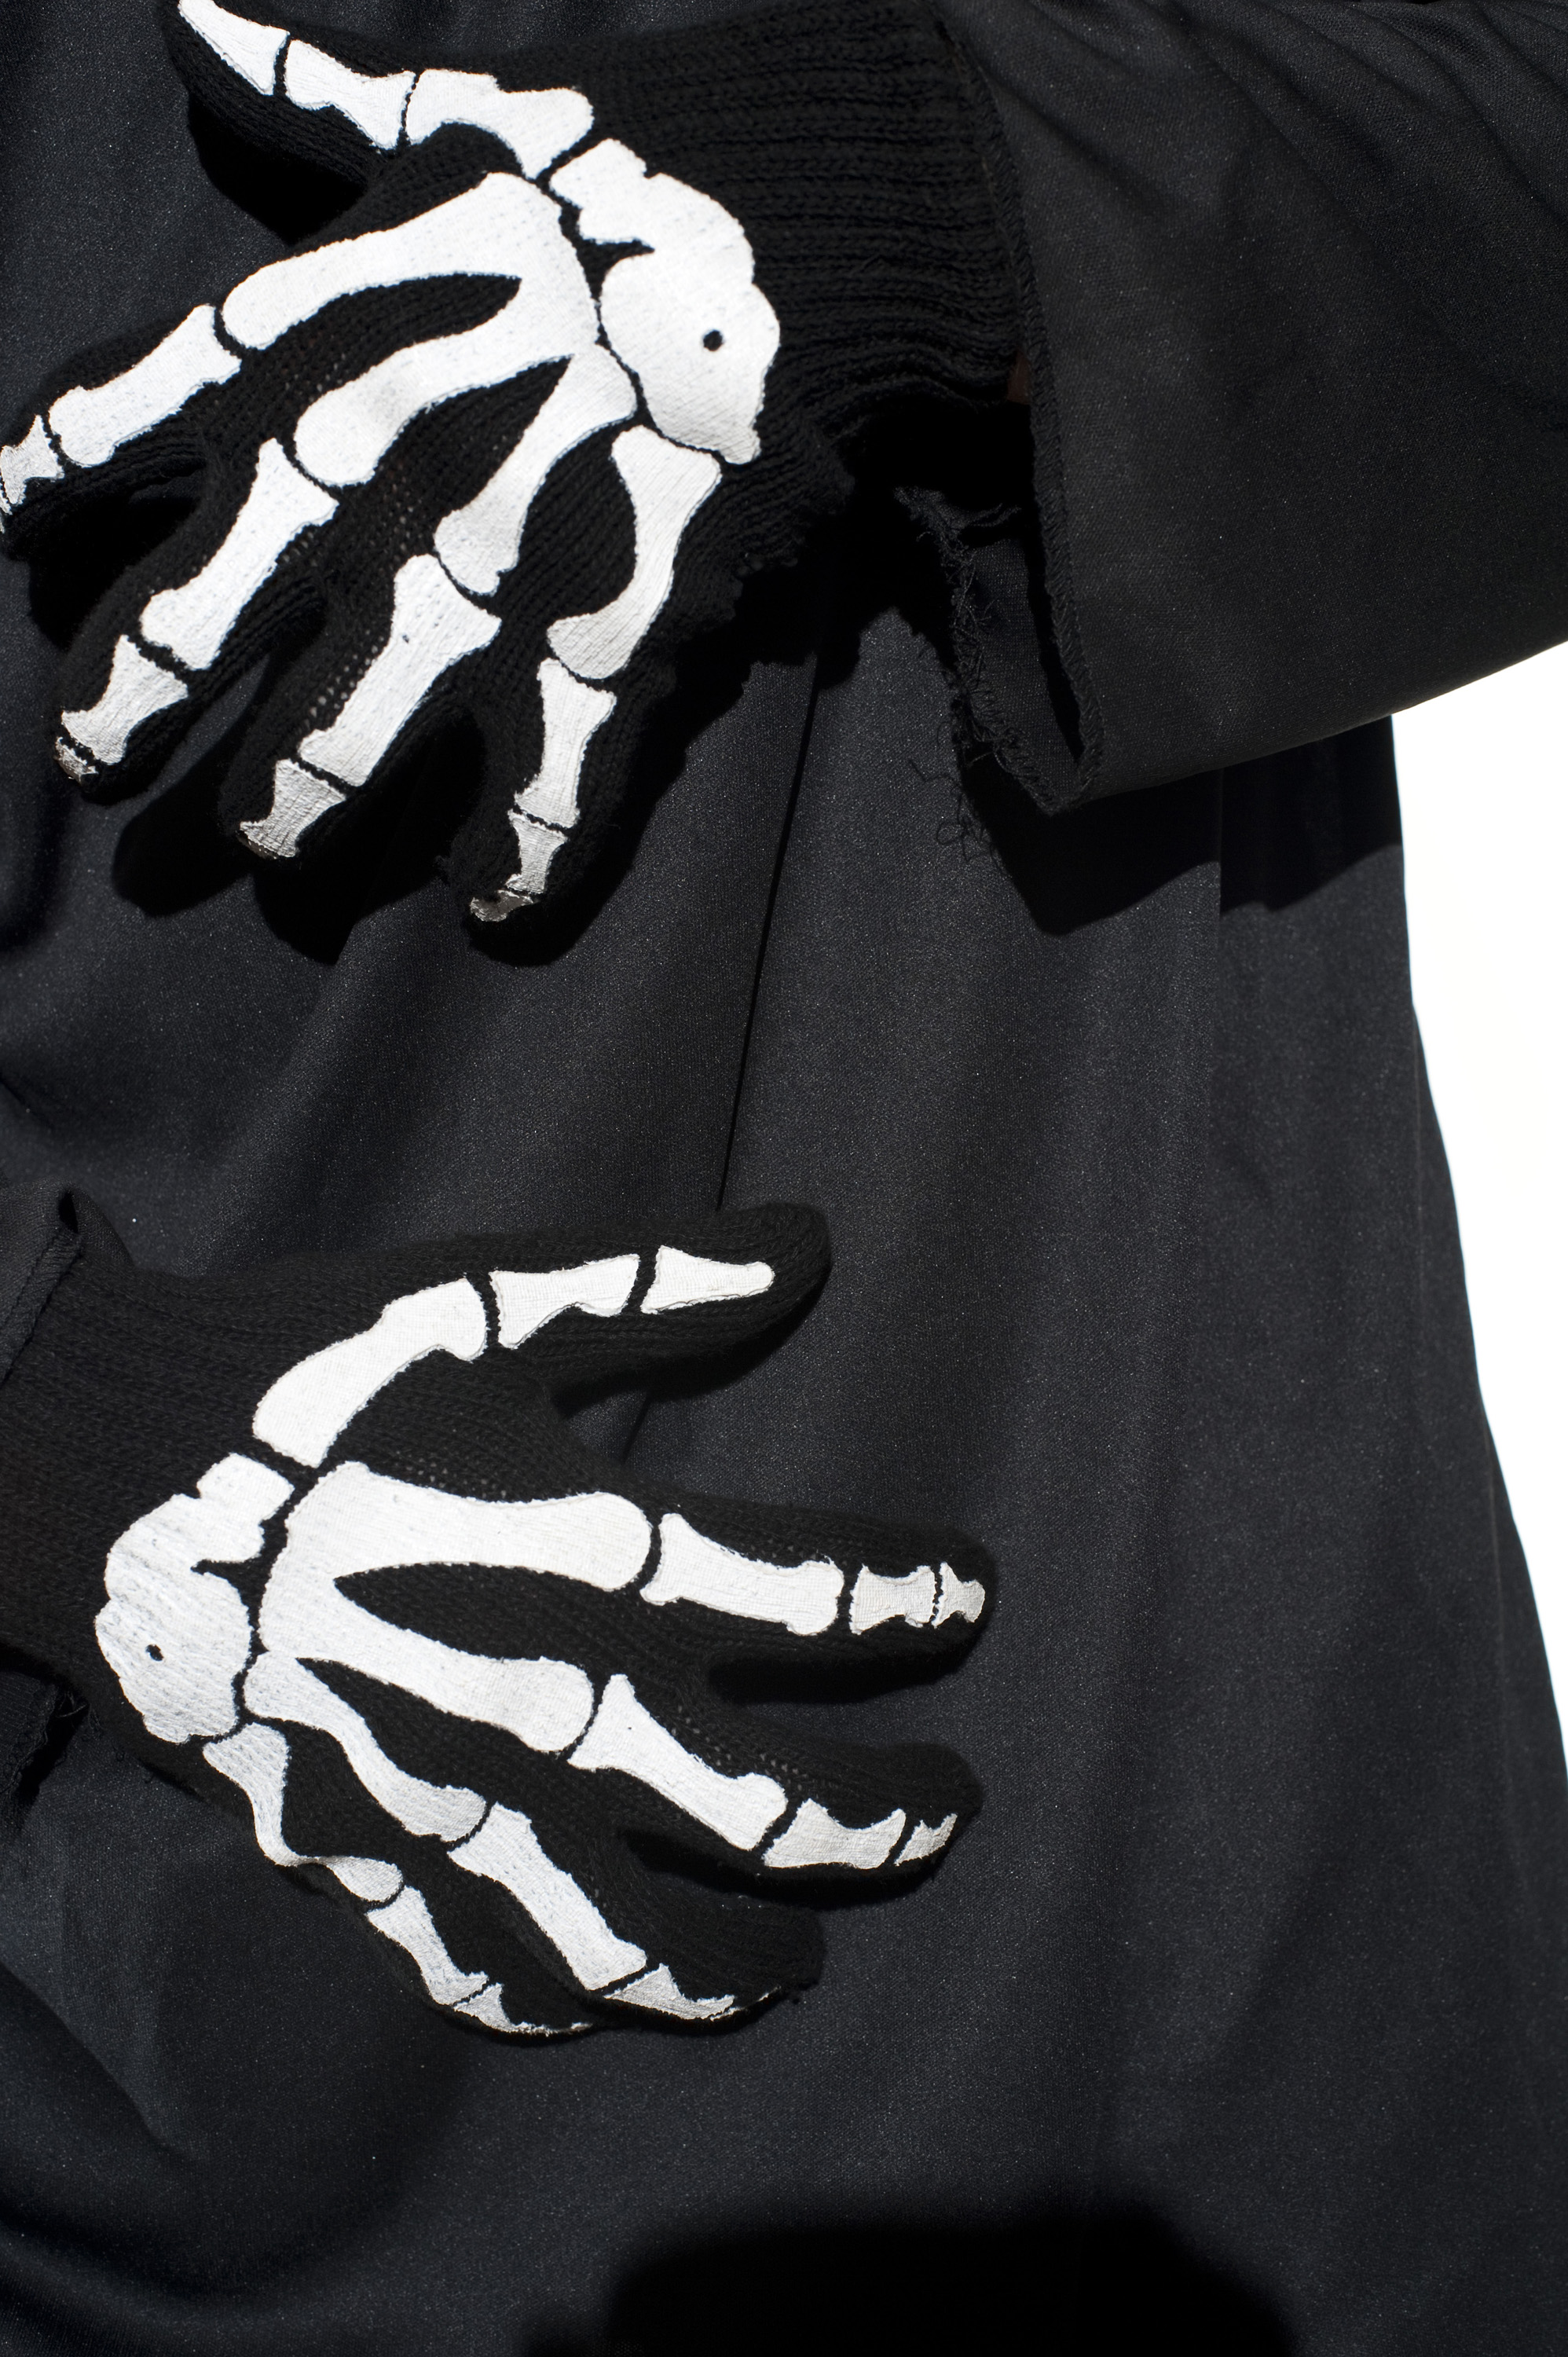 skeleton hands-2661 | Stockarch Free Stock Photo Archive